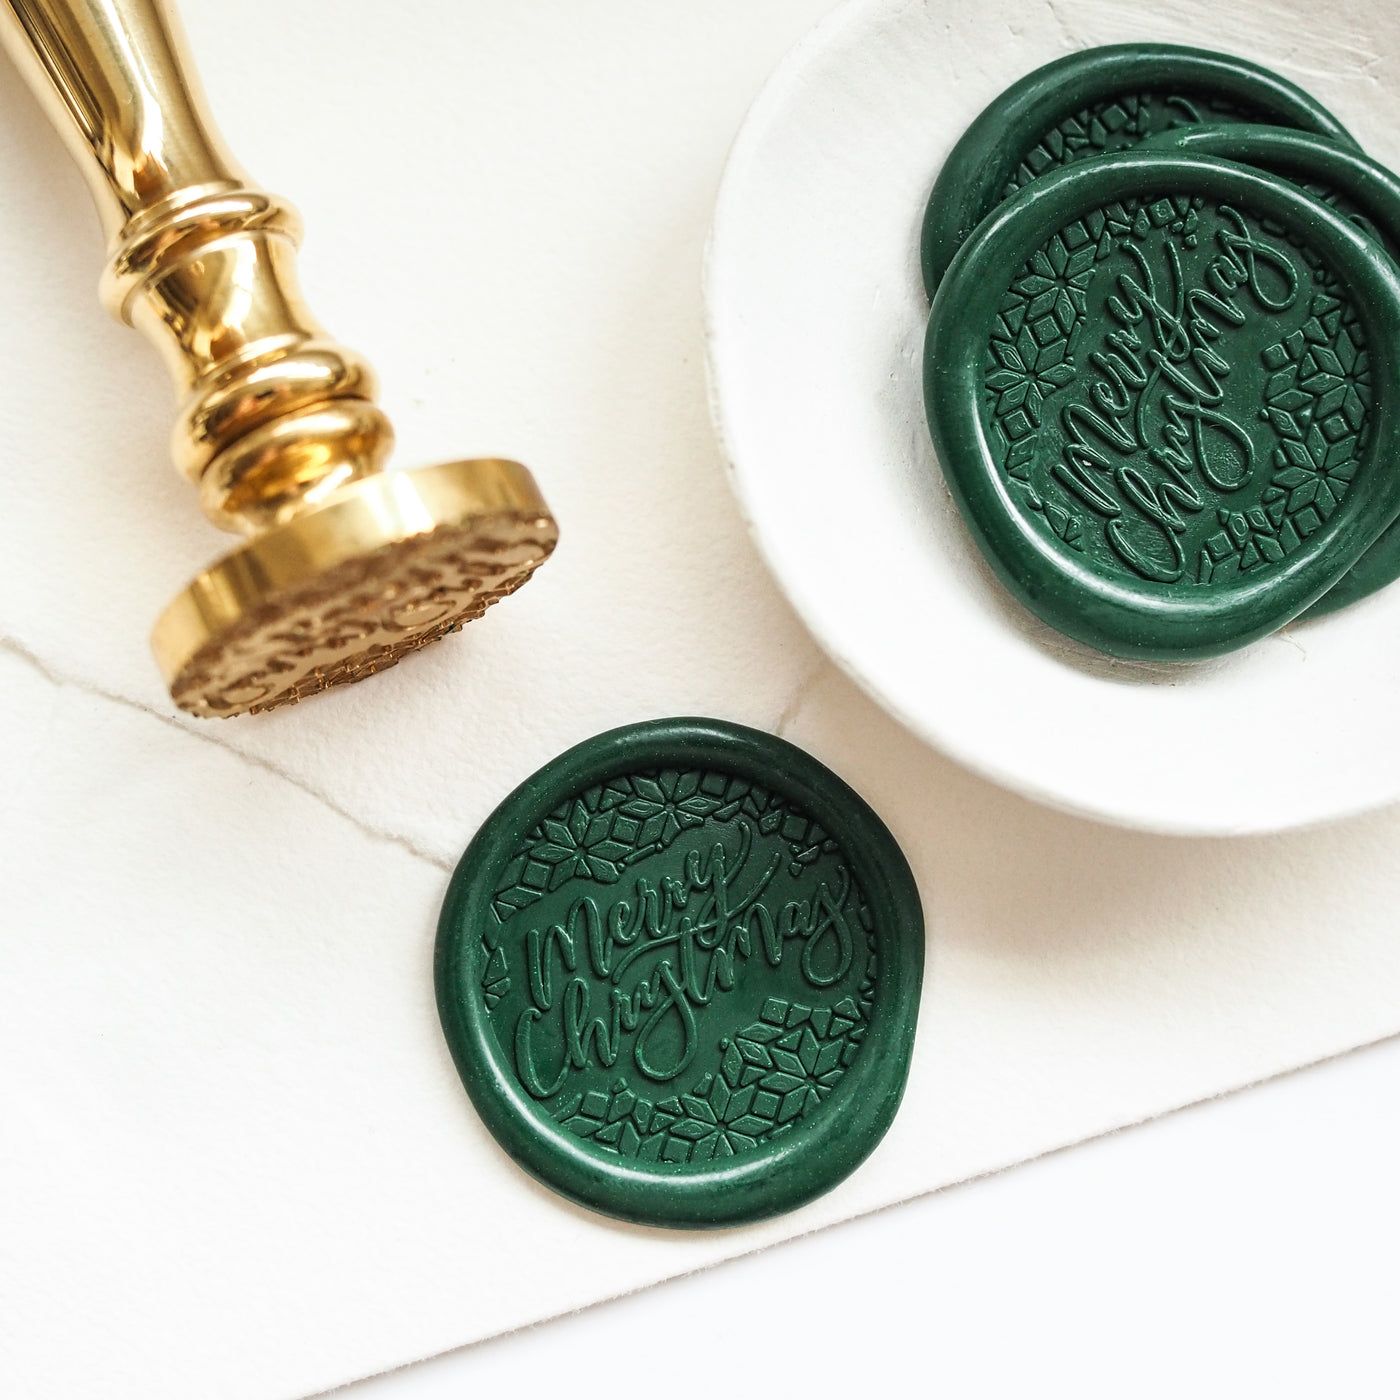 MERRY CHRISTMAS BAUBLE WAX SEAL STAMP - 'BELIEVE' CHRISTMAS COLLECTION